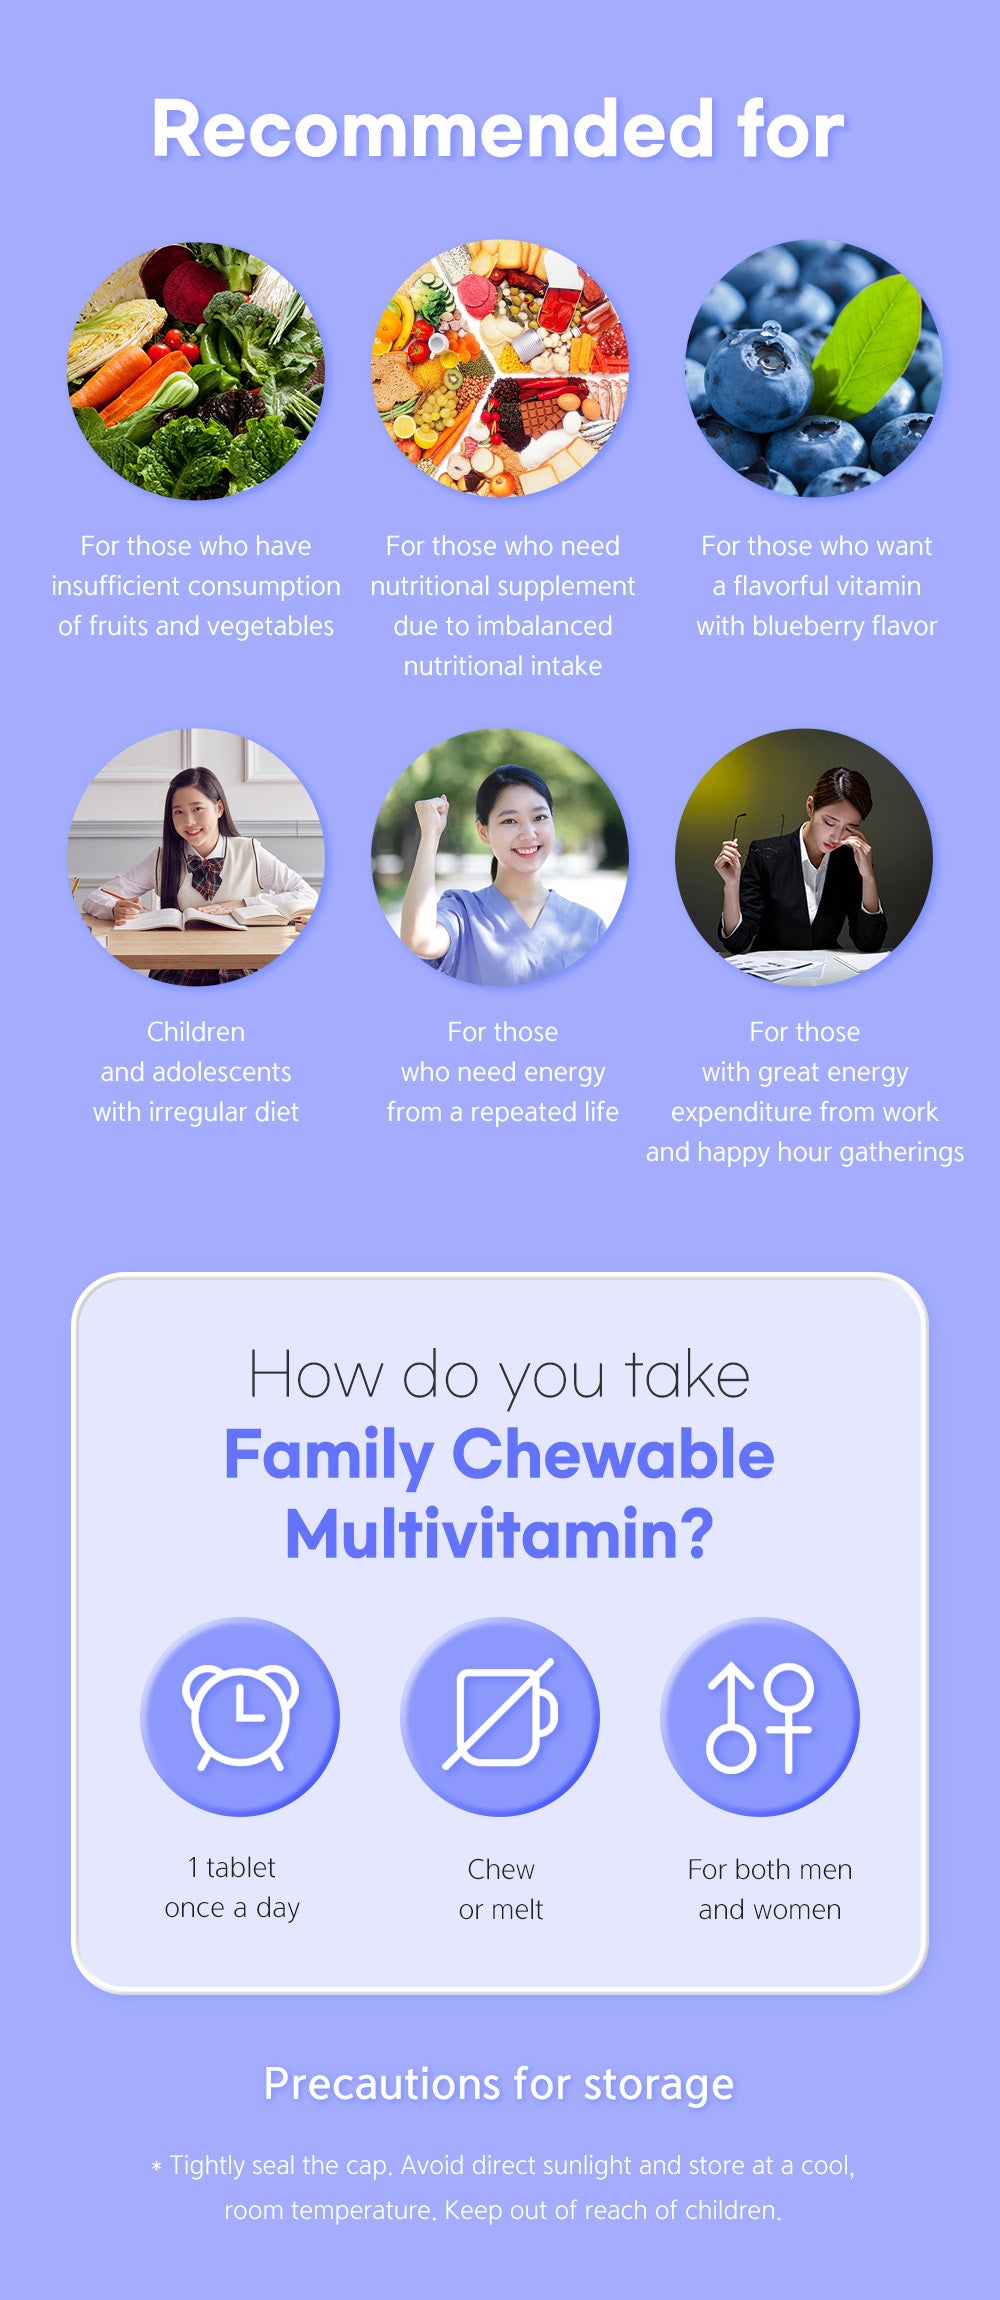 Dr. Elizabeth's Chewable Family Multi-Vitamin - Blueberry Flavour 2g x 60 Tablets for Optimal Health